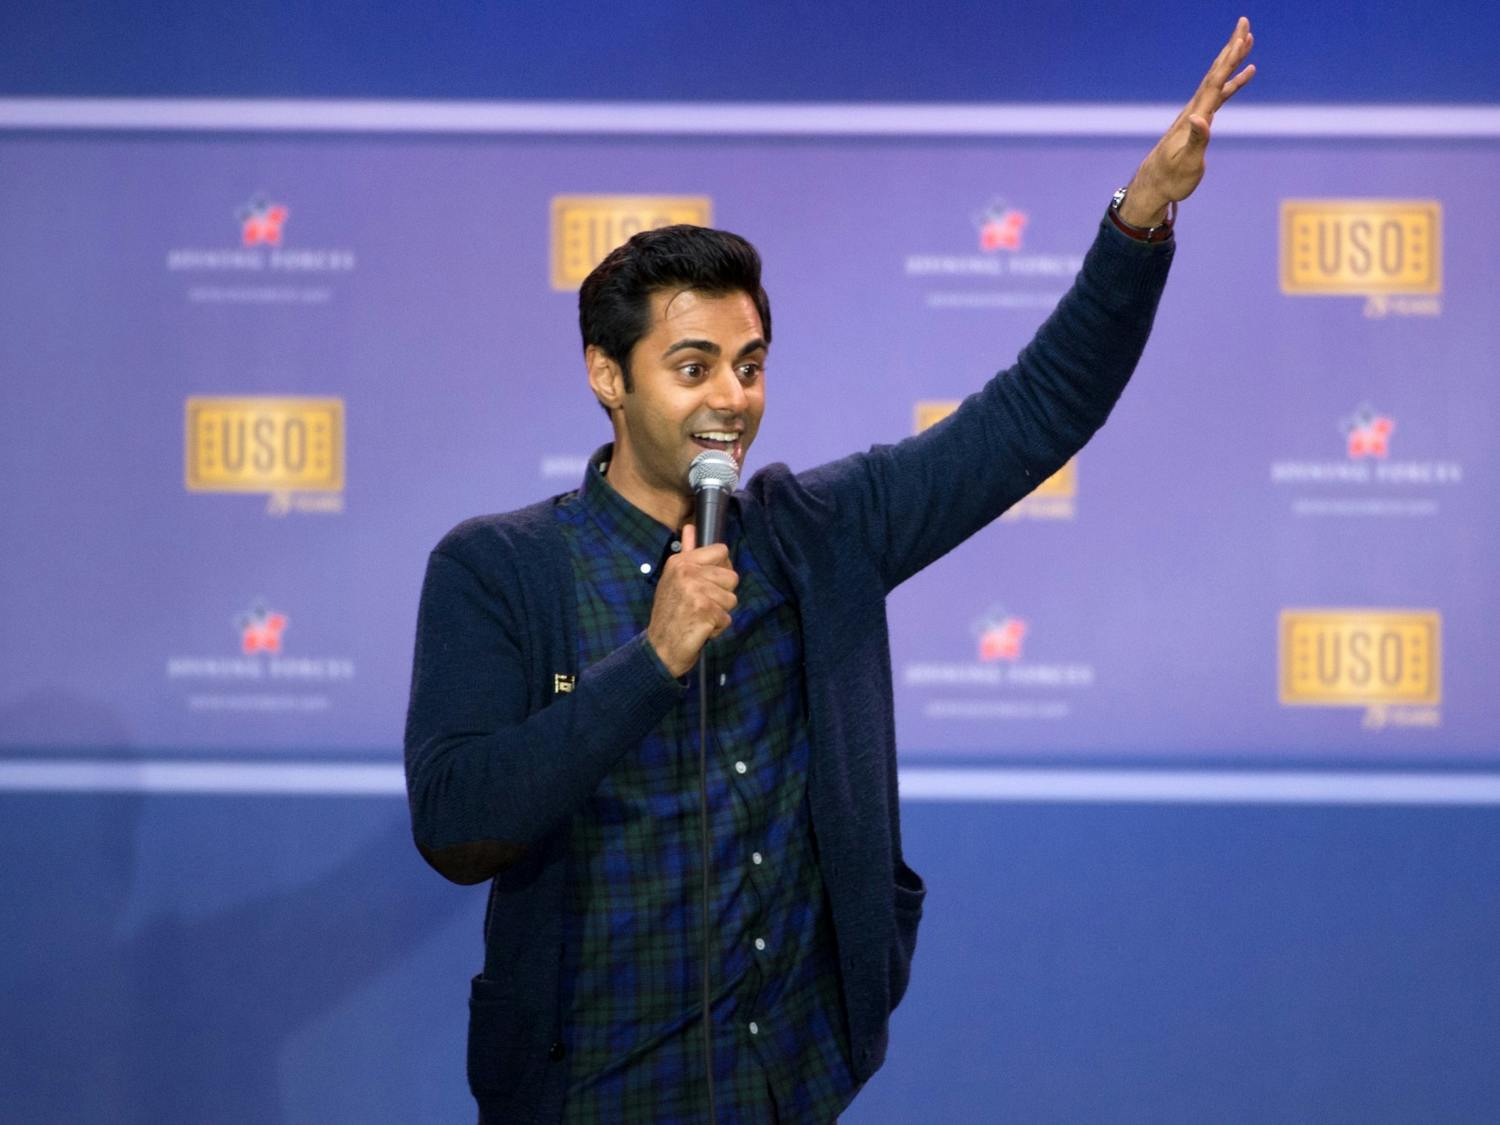 Comedian Hasan Minhaj performs during a comedy show at Joint Base Andrews in Washington in 2016.